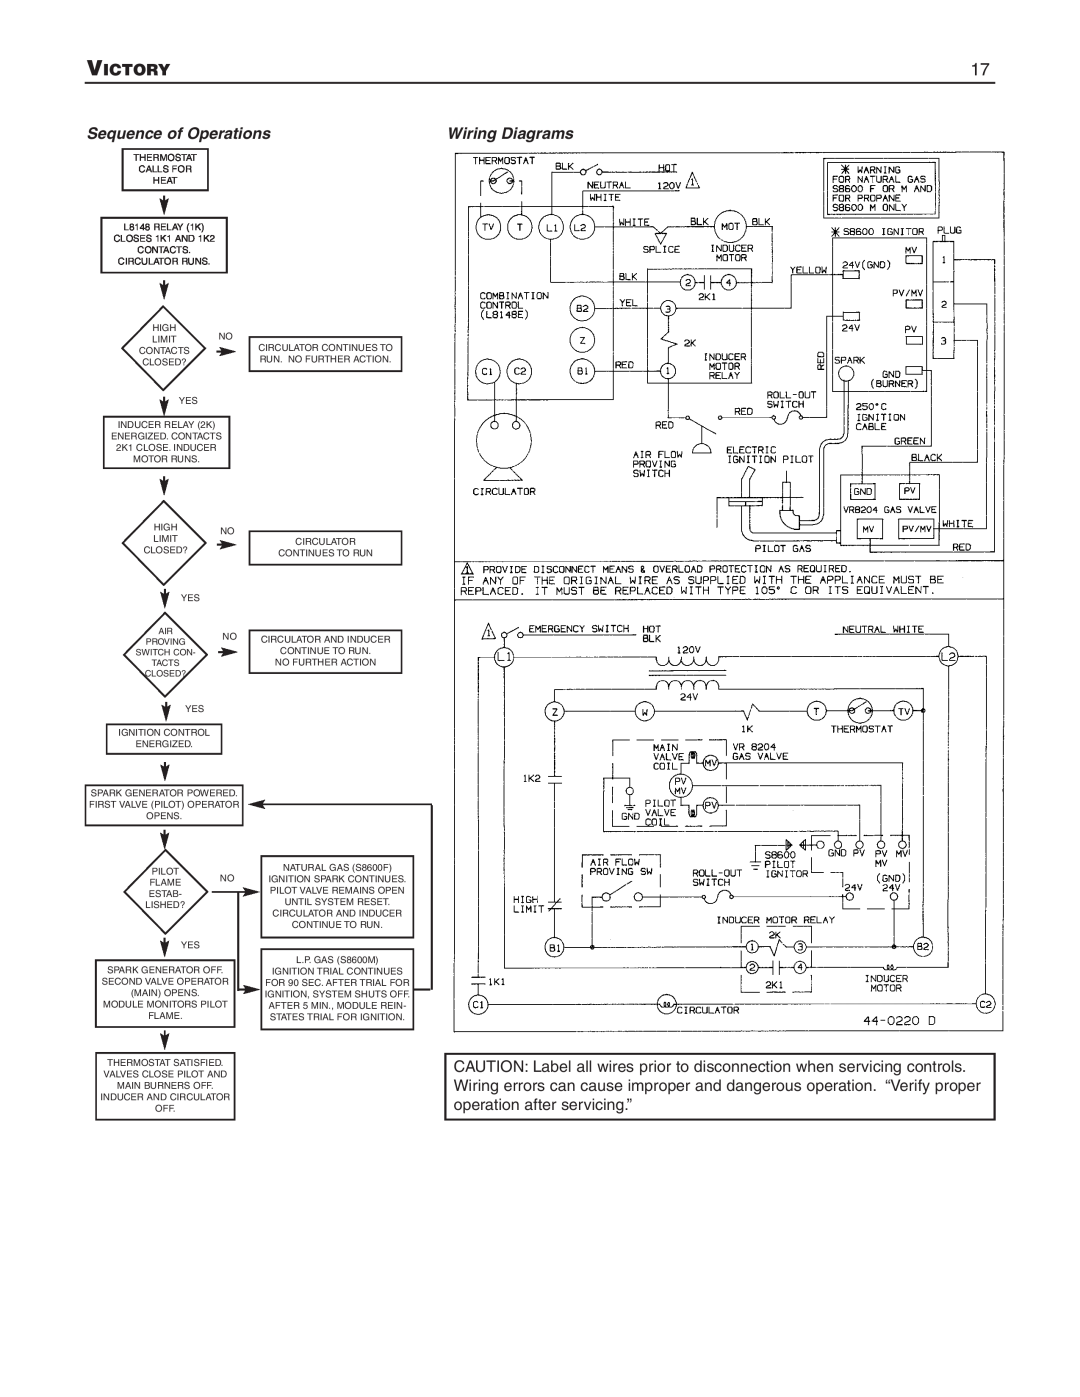 Slant/Fin V-33, V-180 operating instructions Sequence of Operations, Wiring Diagrams 